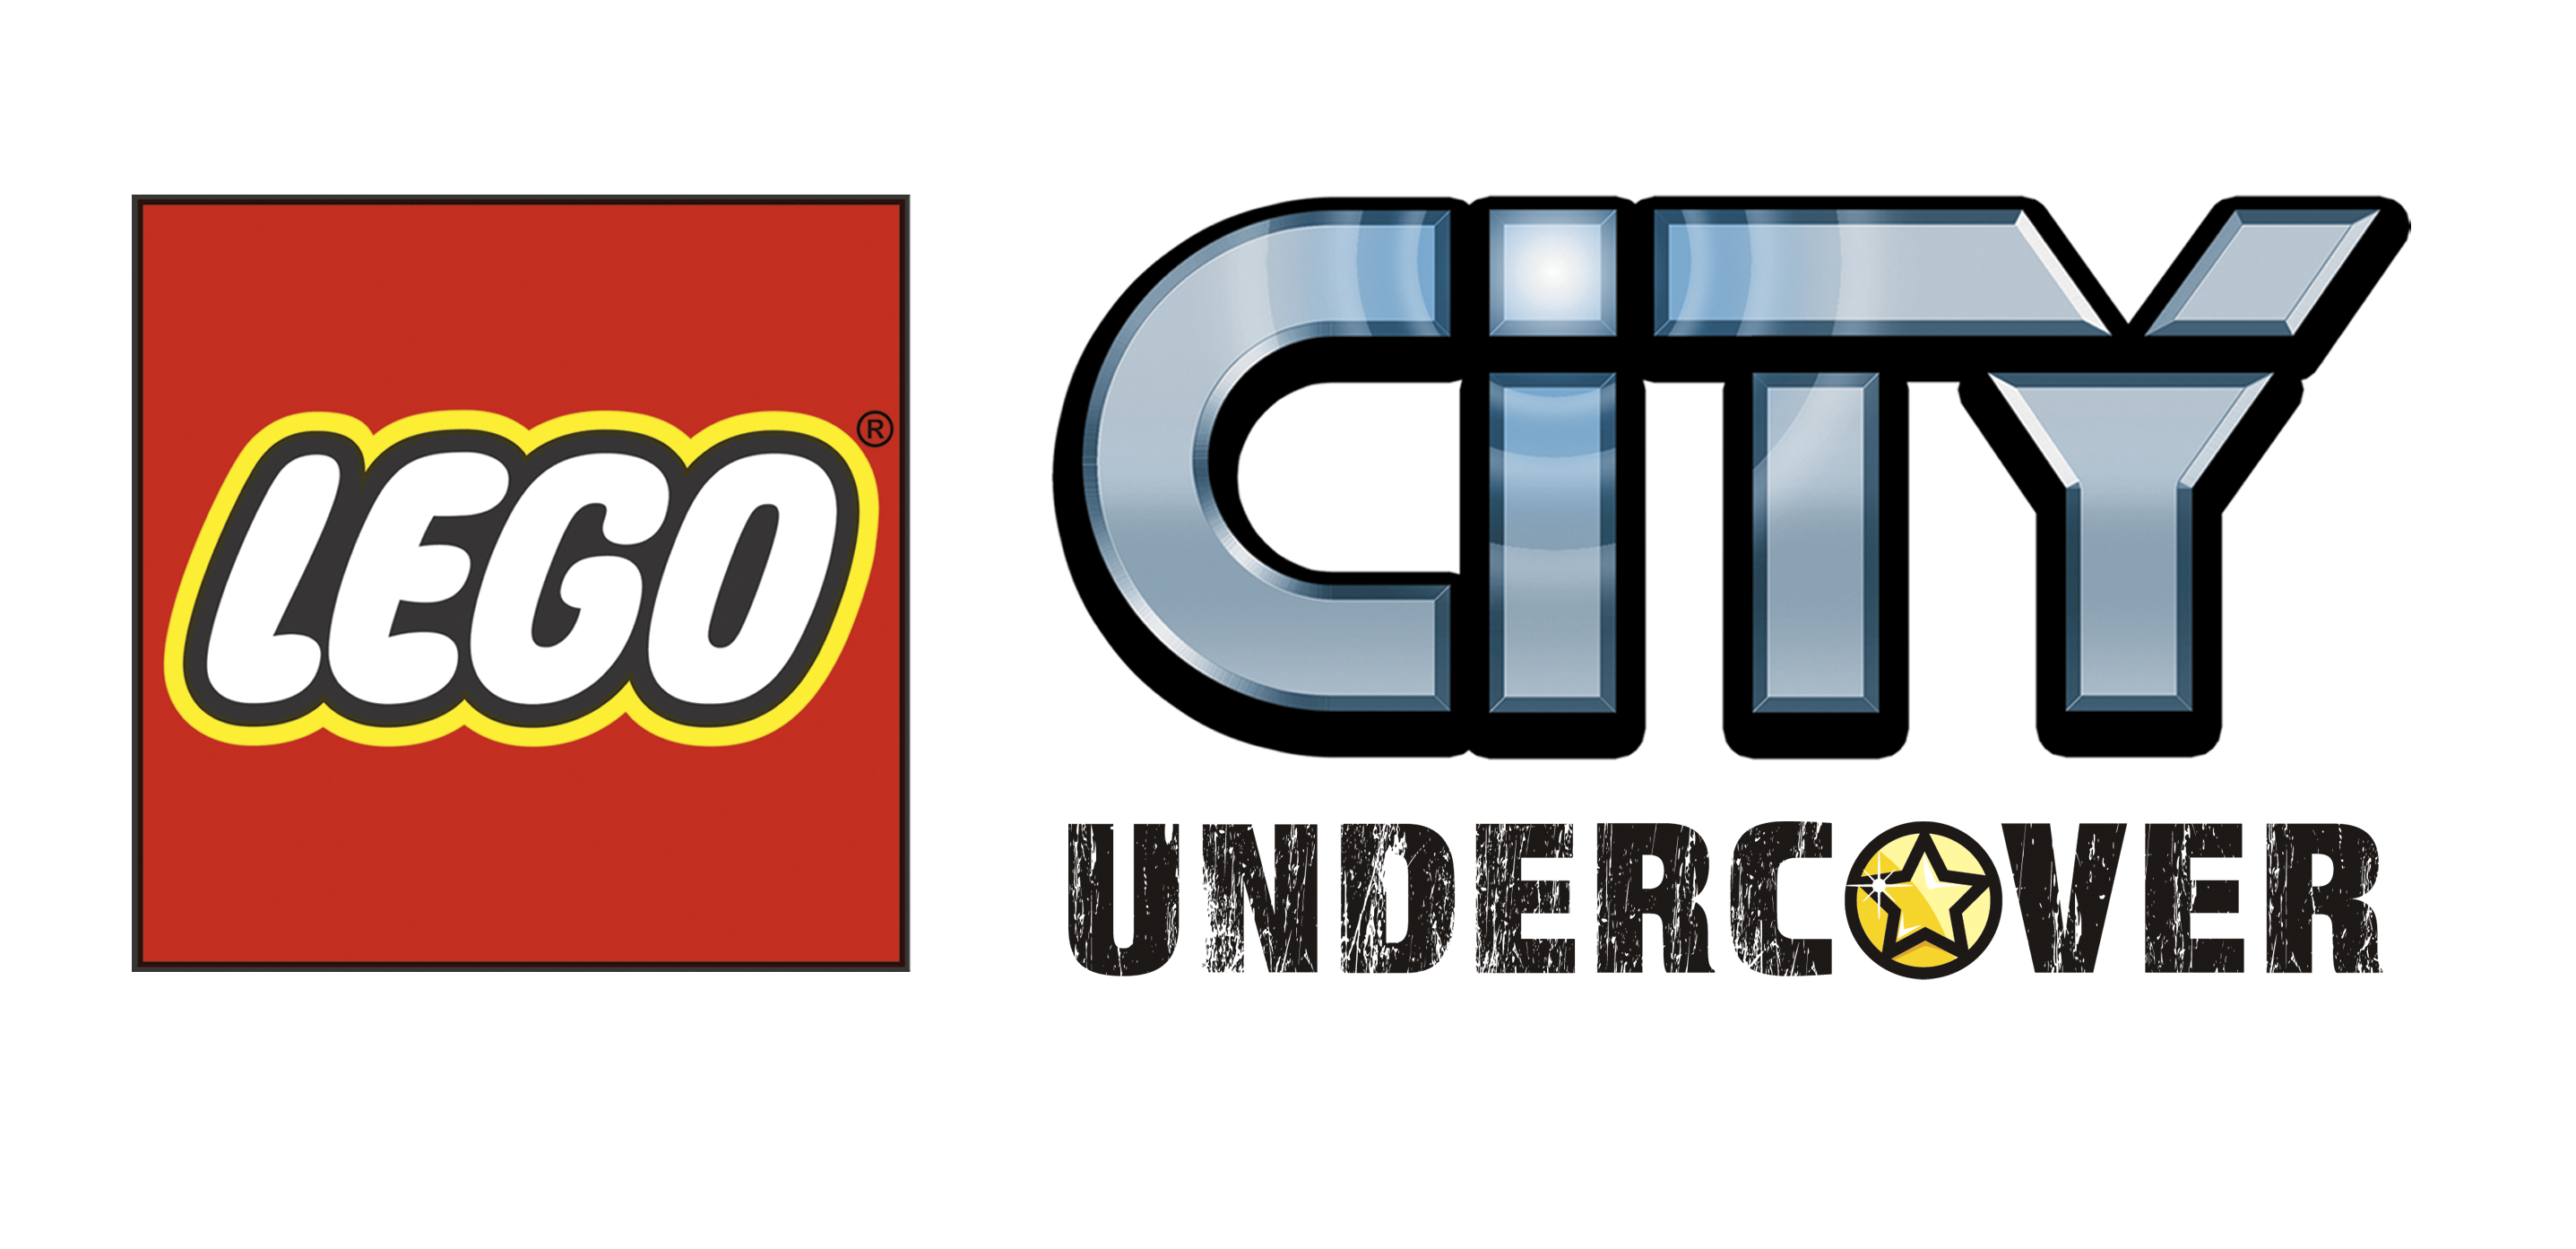 Image undercover logo png. Lego clipart lego city